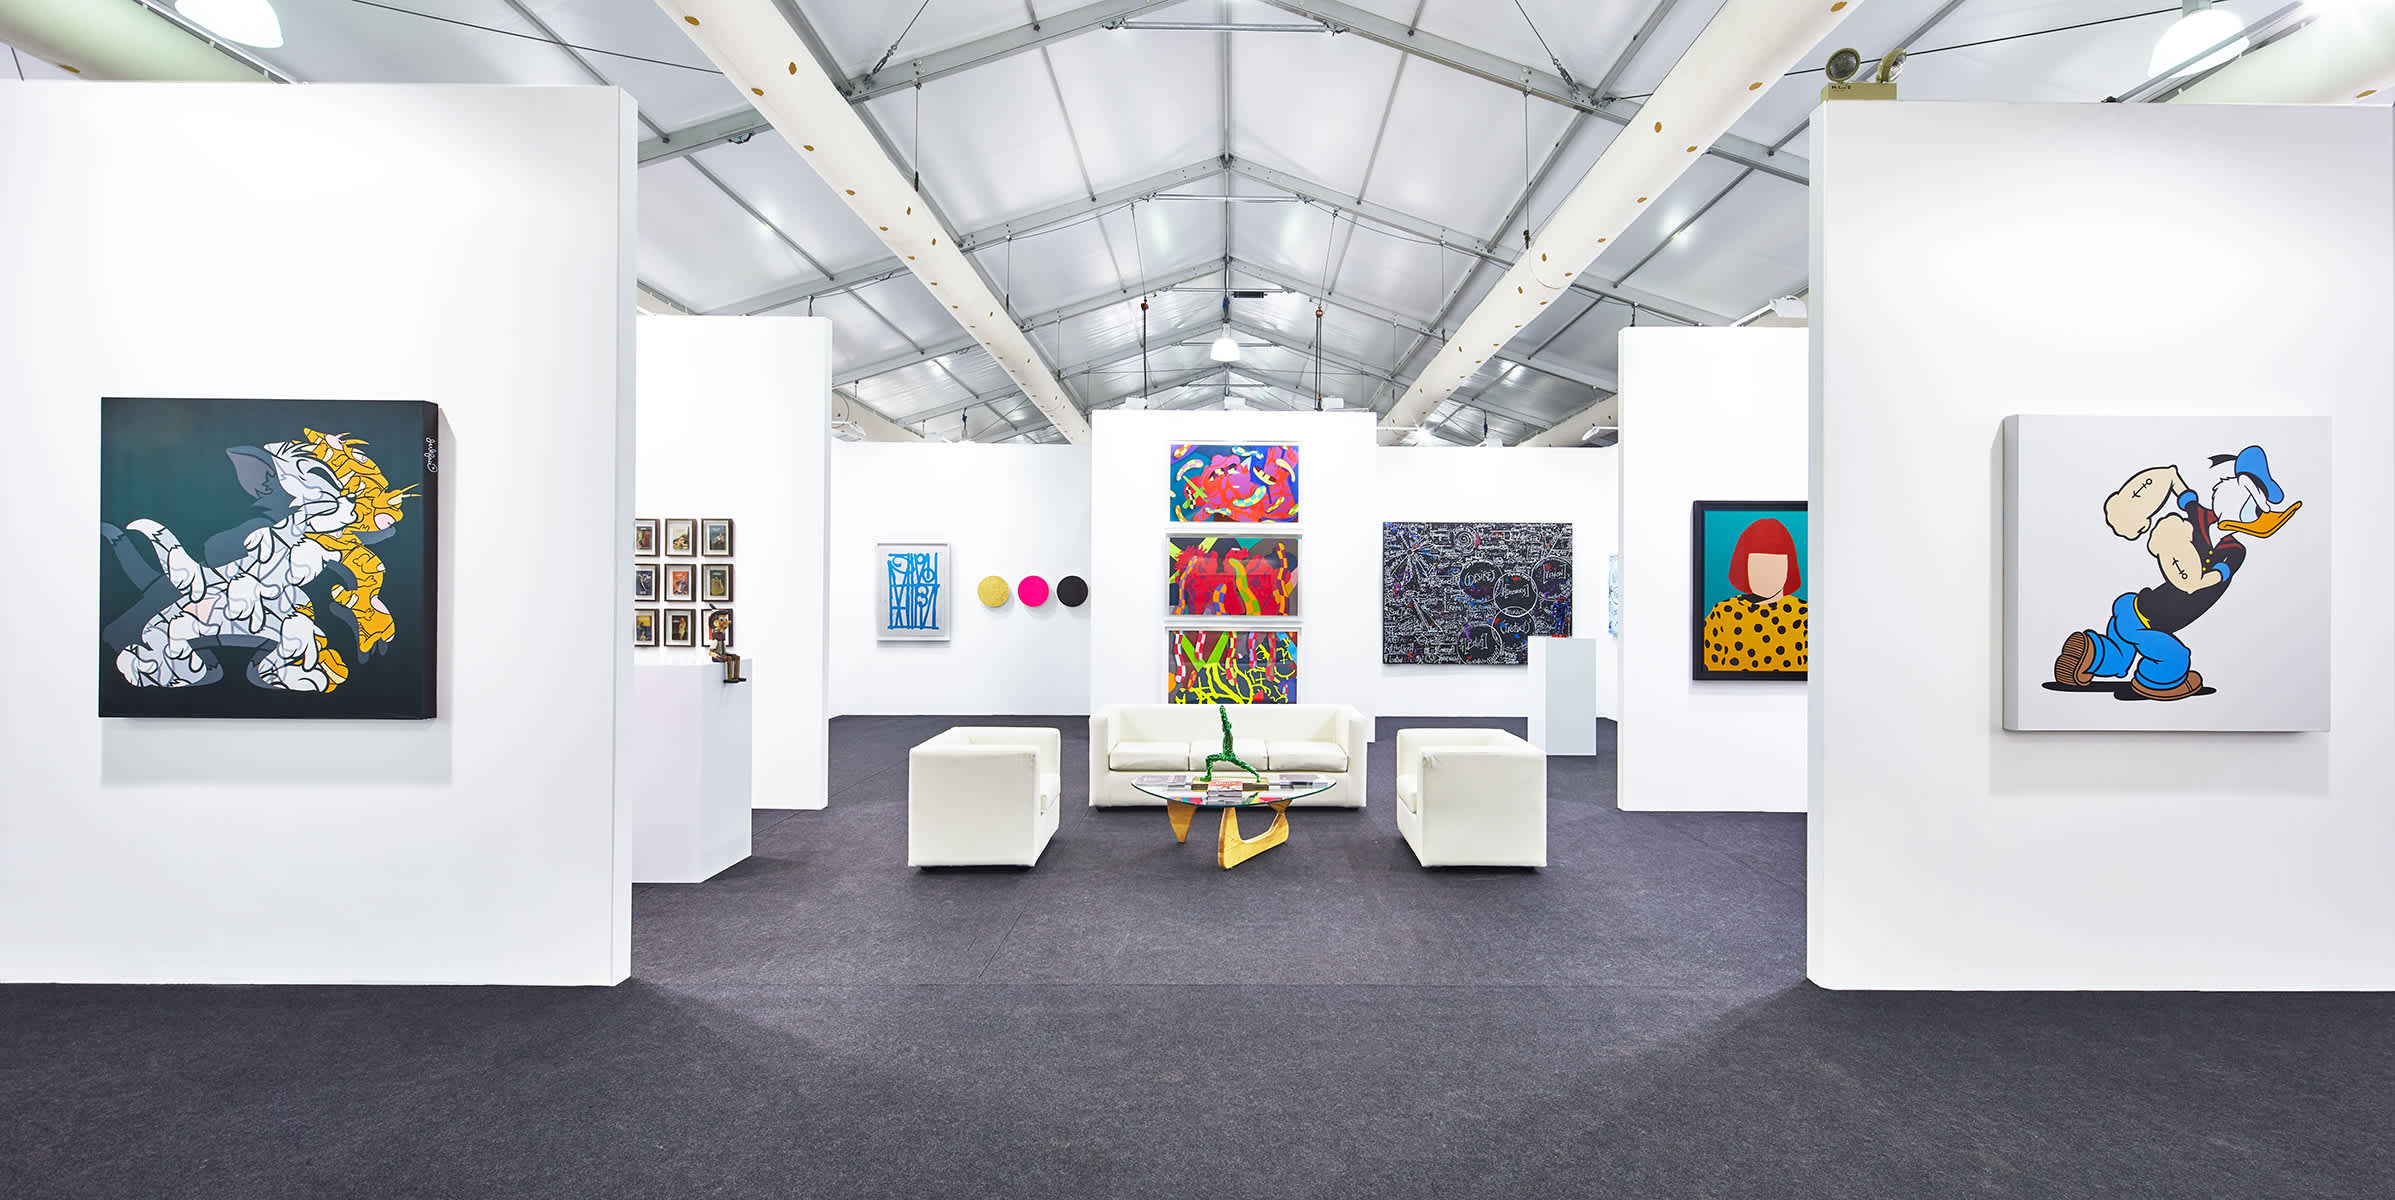 Maddox Gallery returns to Art Central Hong Kong for a second year